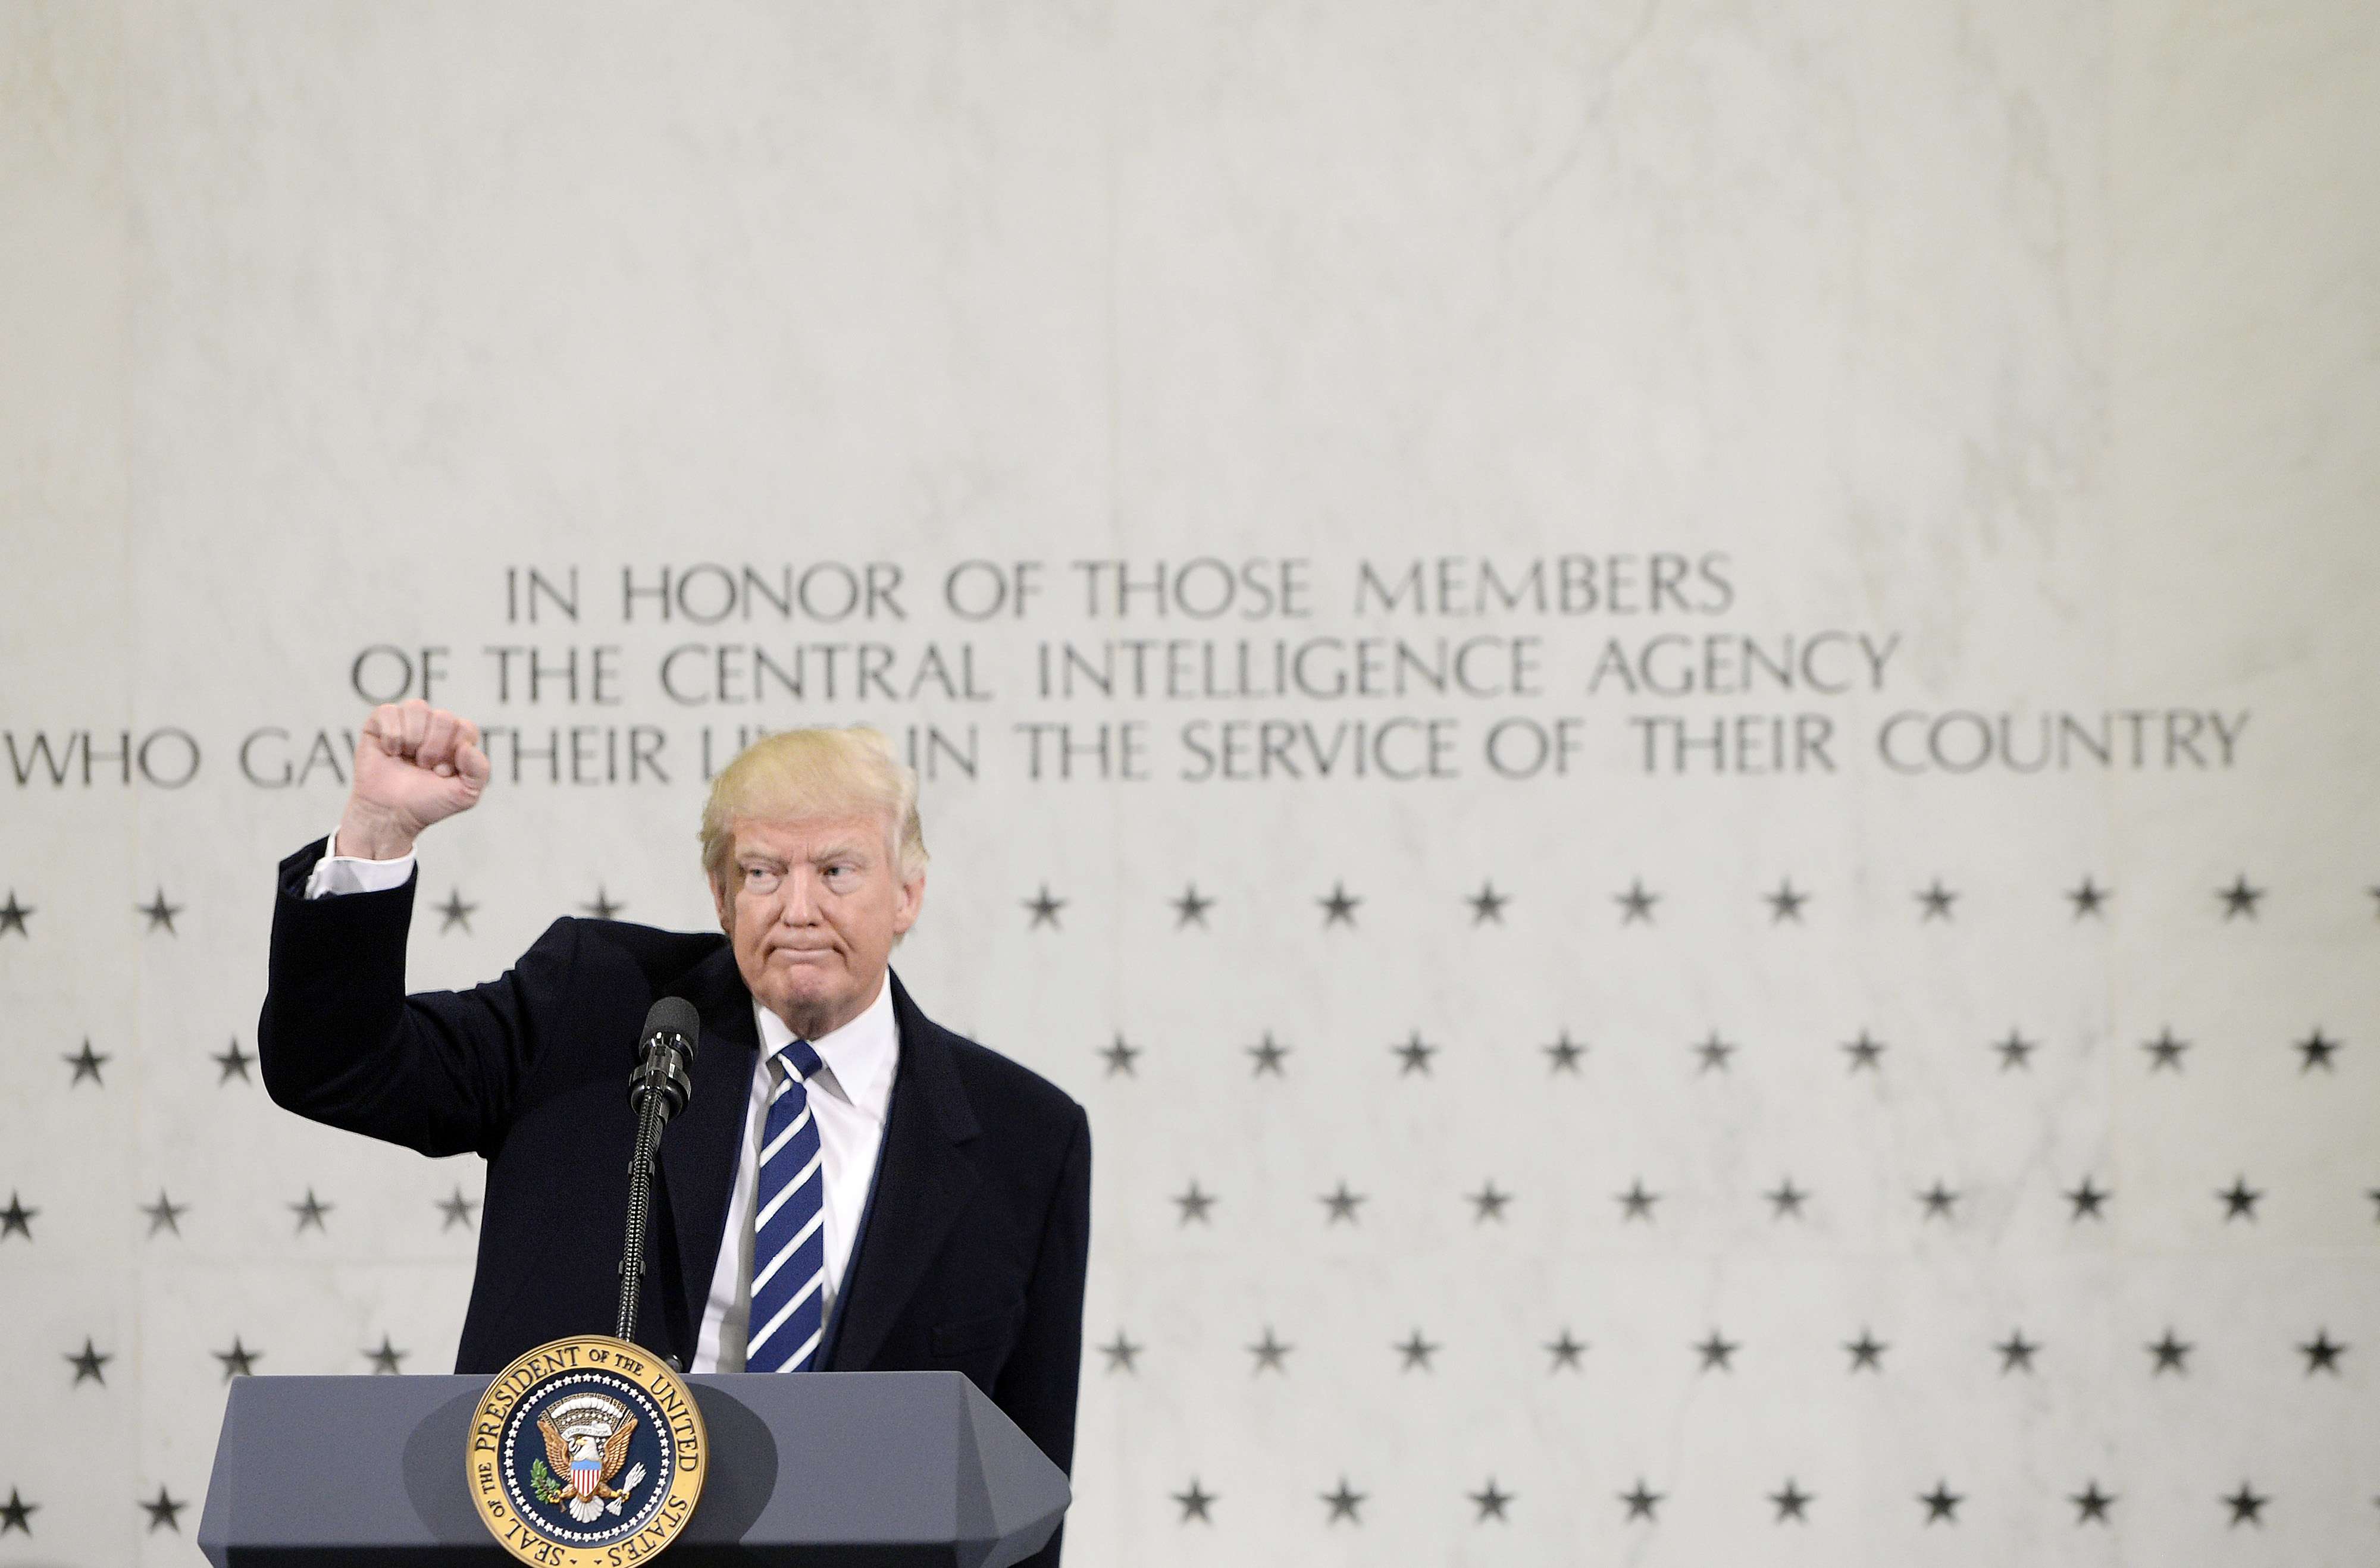 US President Trump speaks at CIA headquarters in Langley. Photo: TNS